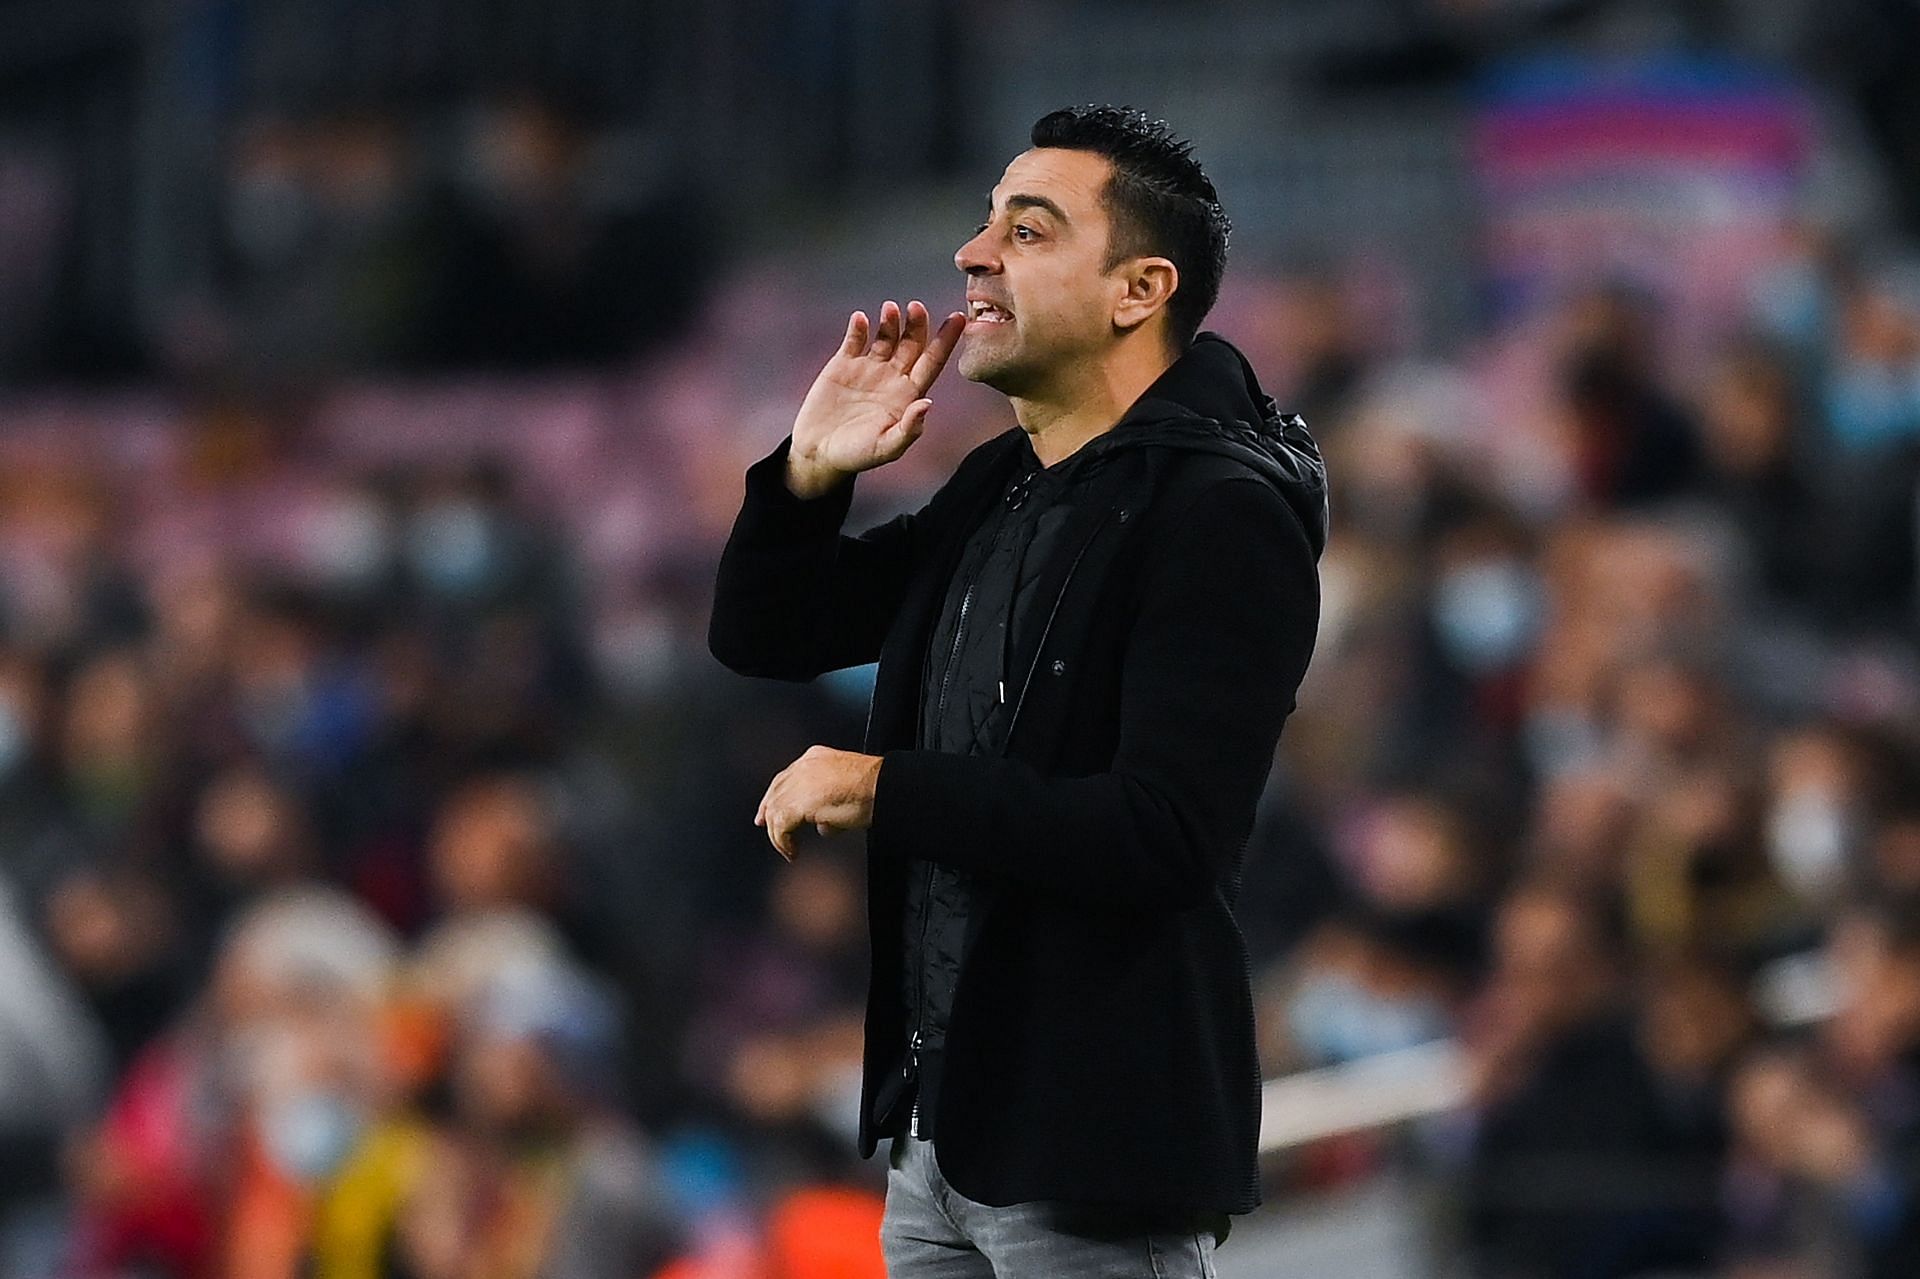 Can Xavi win his first game against Madrid as Barca manager today?